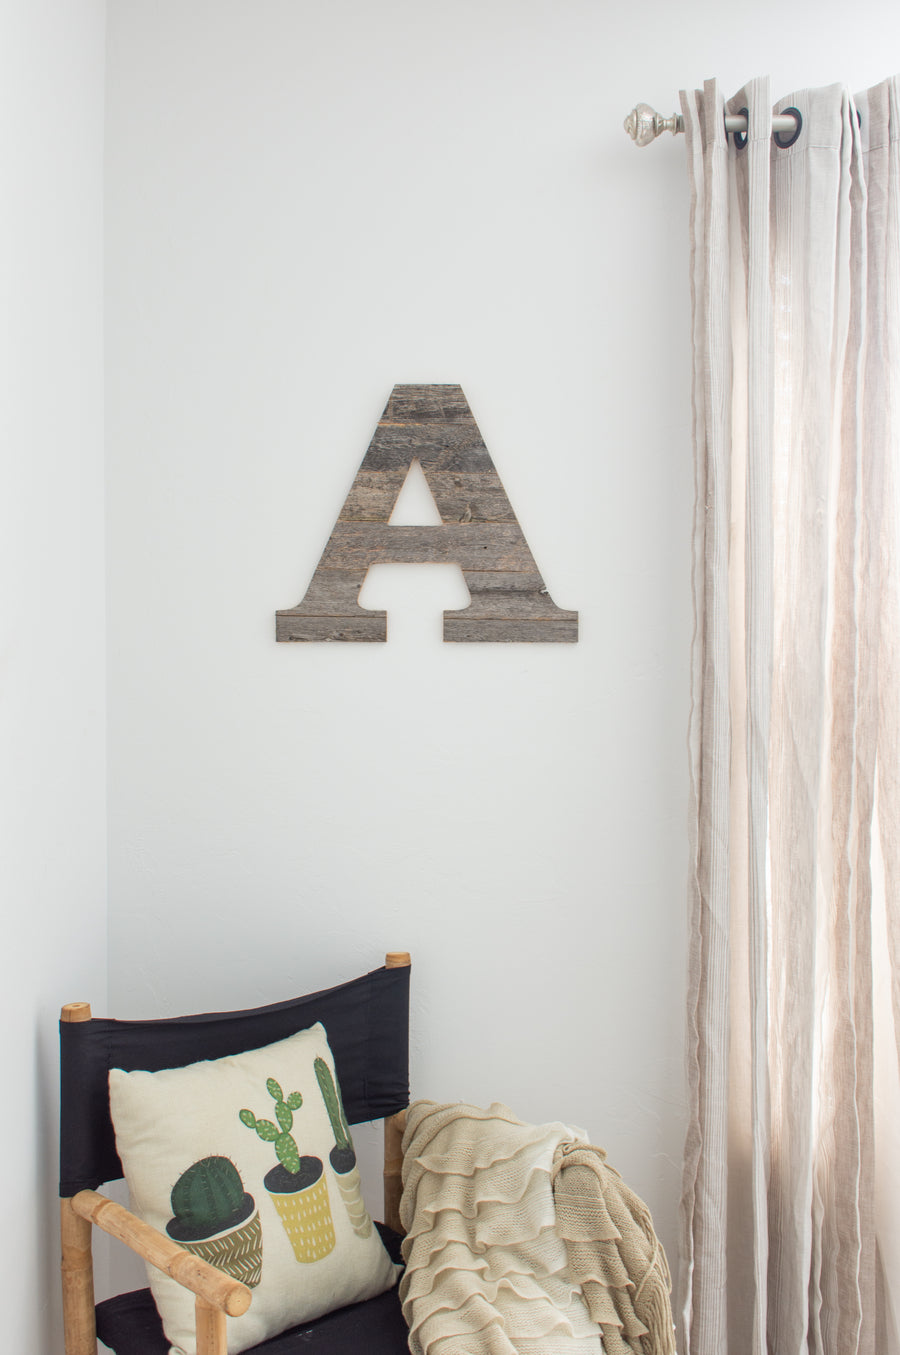 Rustic Decor for Your Home | Barnwood Picture Frame Sizes | Wall Decor